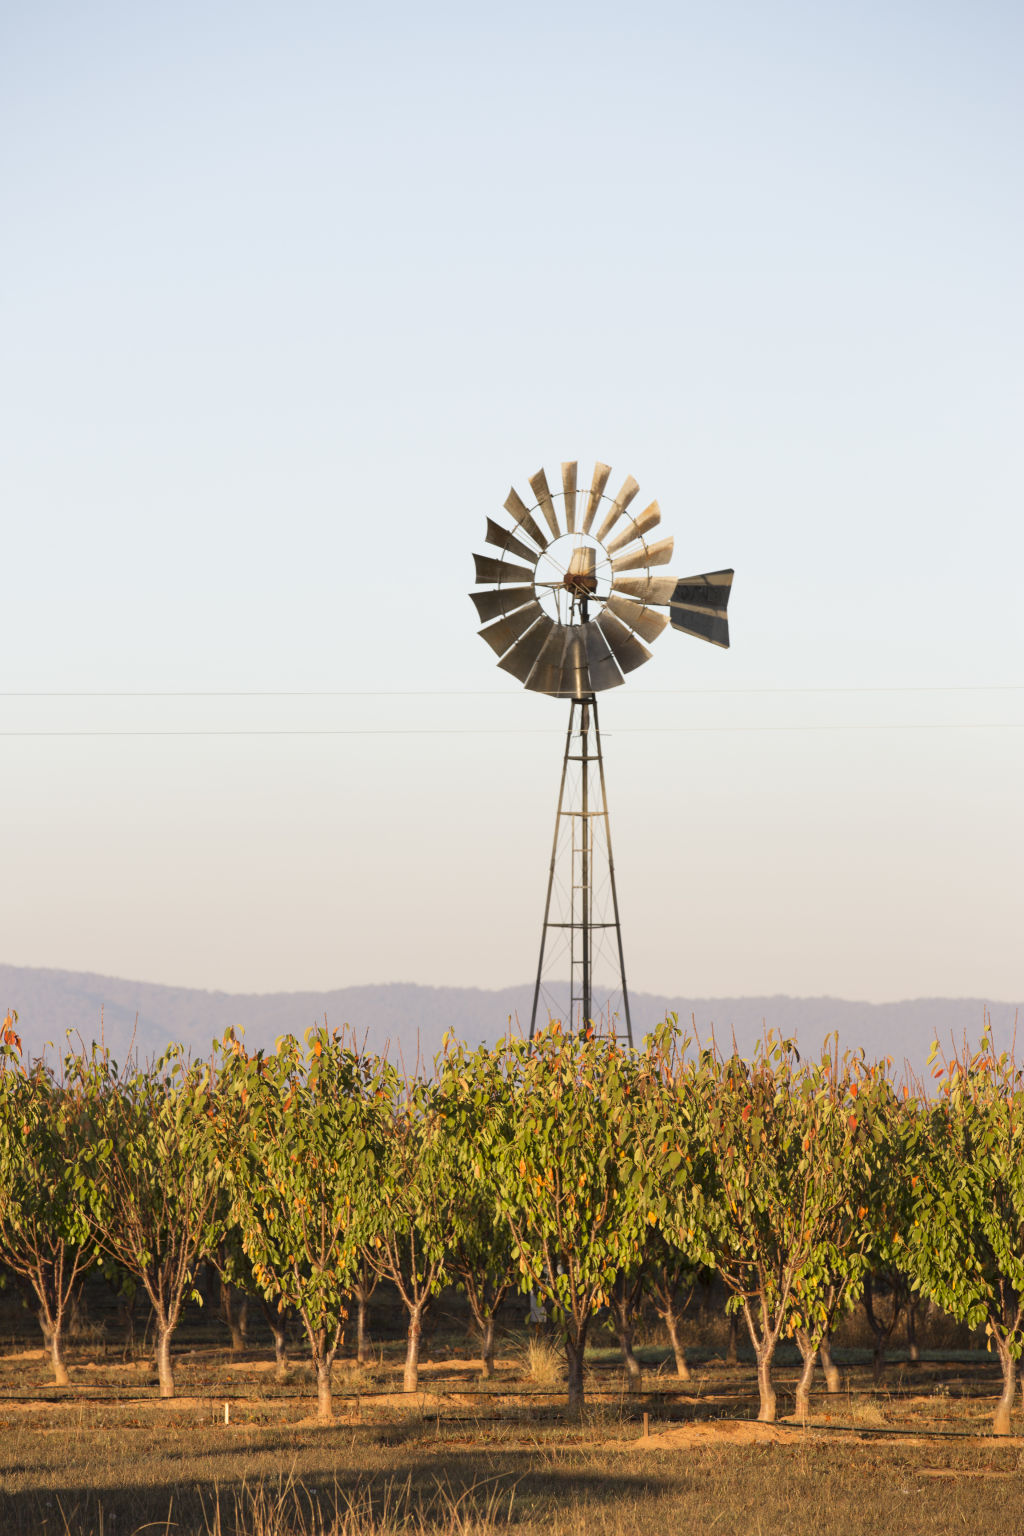 Property prices in Mudgee has dramatically increased over the last decade as a result of increased tourism and the mining boom Photo: James Horan